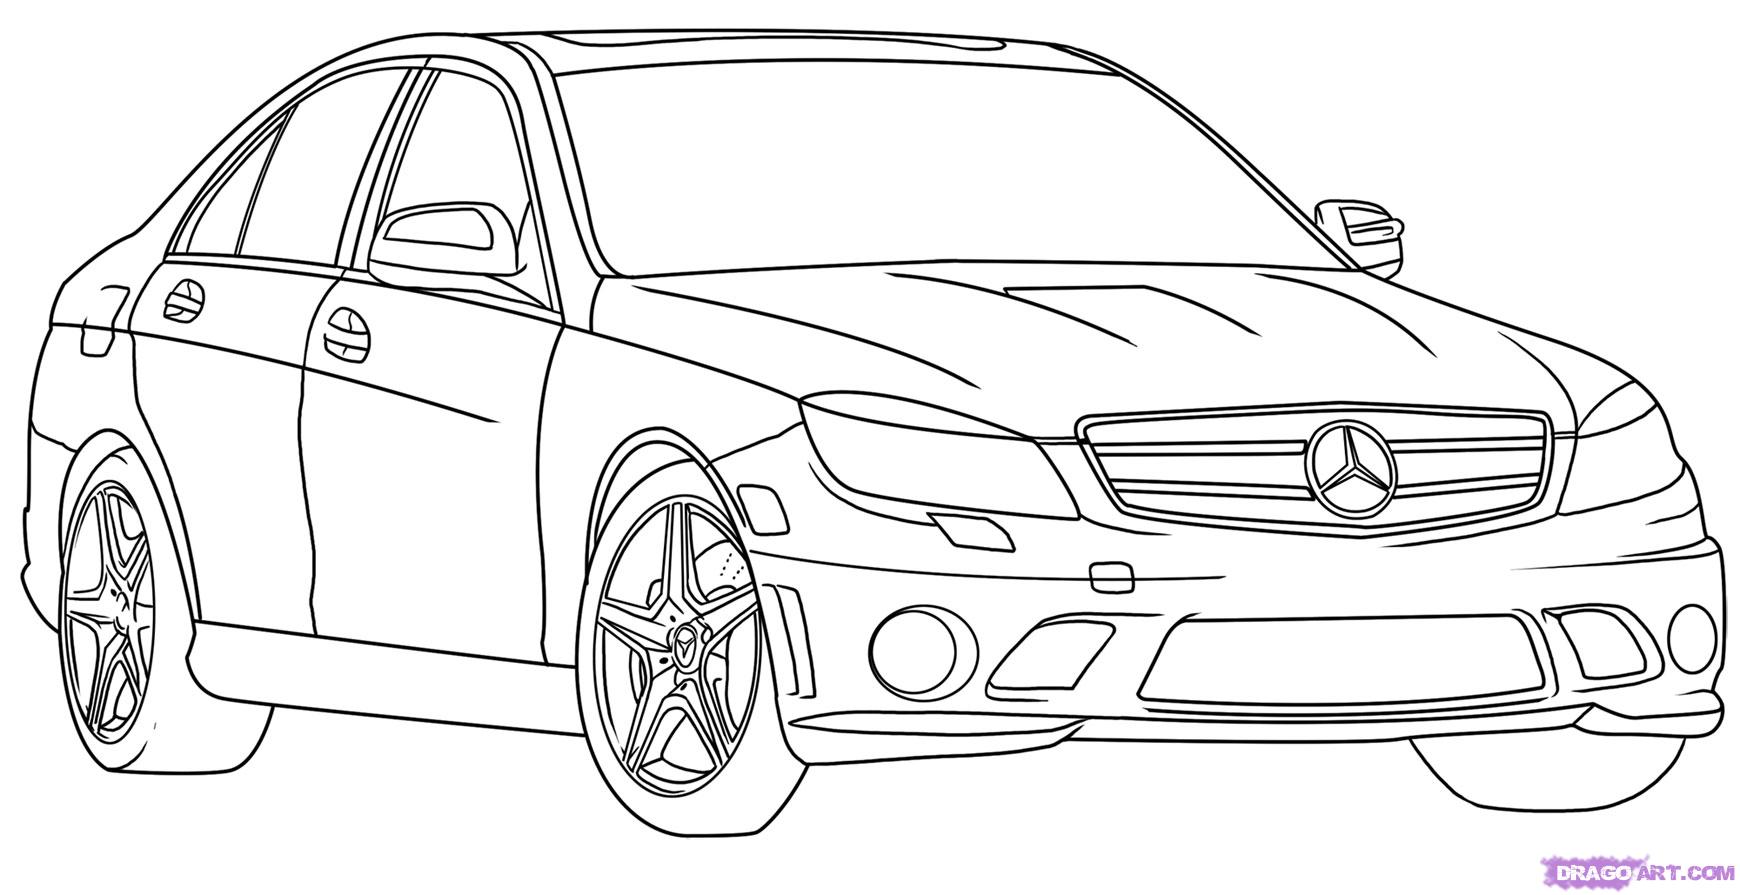 How to Draw a Mercedes-Benz, Step by Step, Cars, Draw Cars Online 